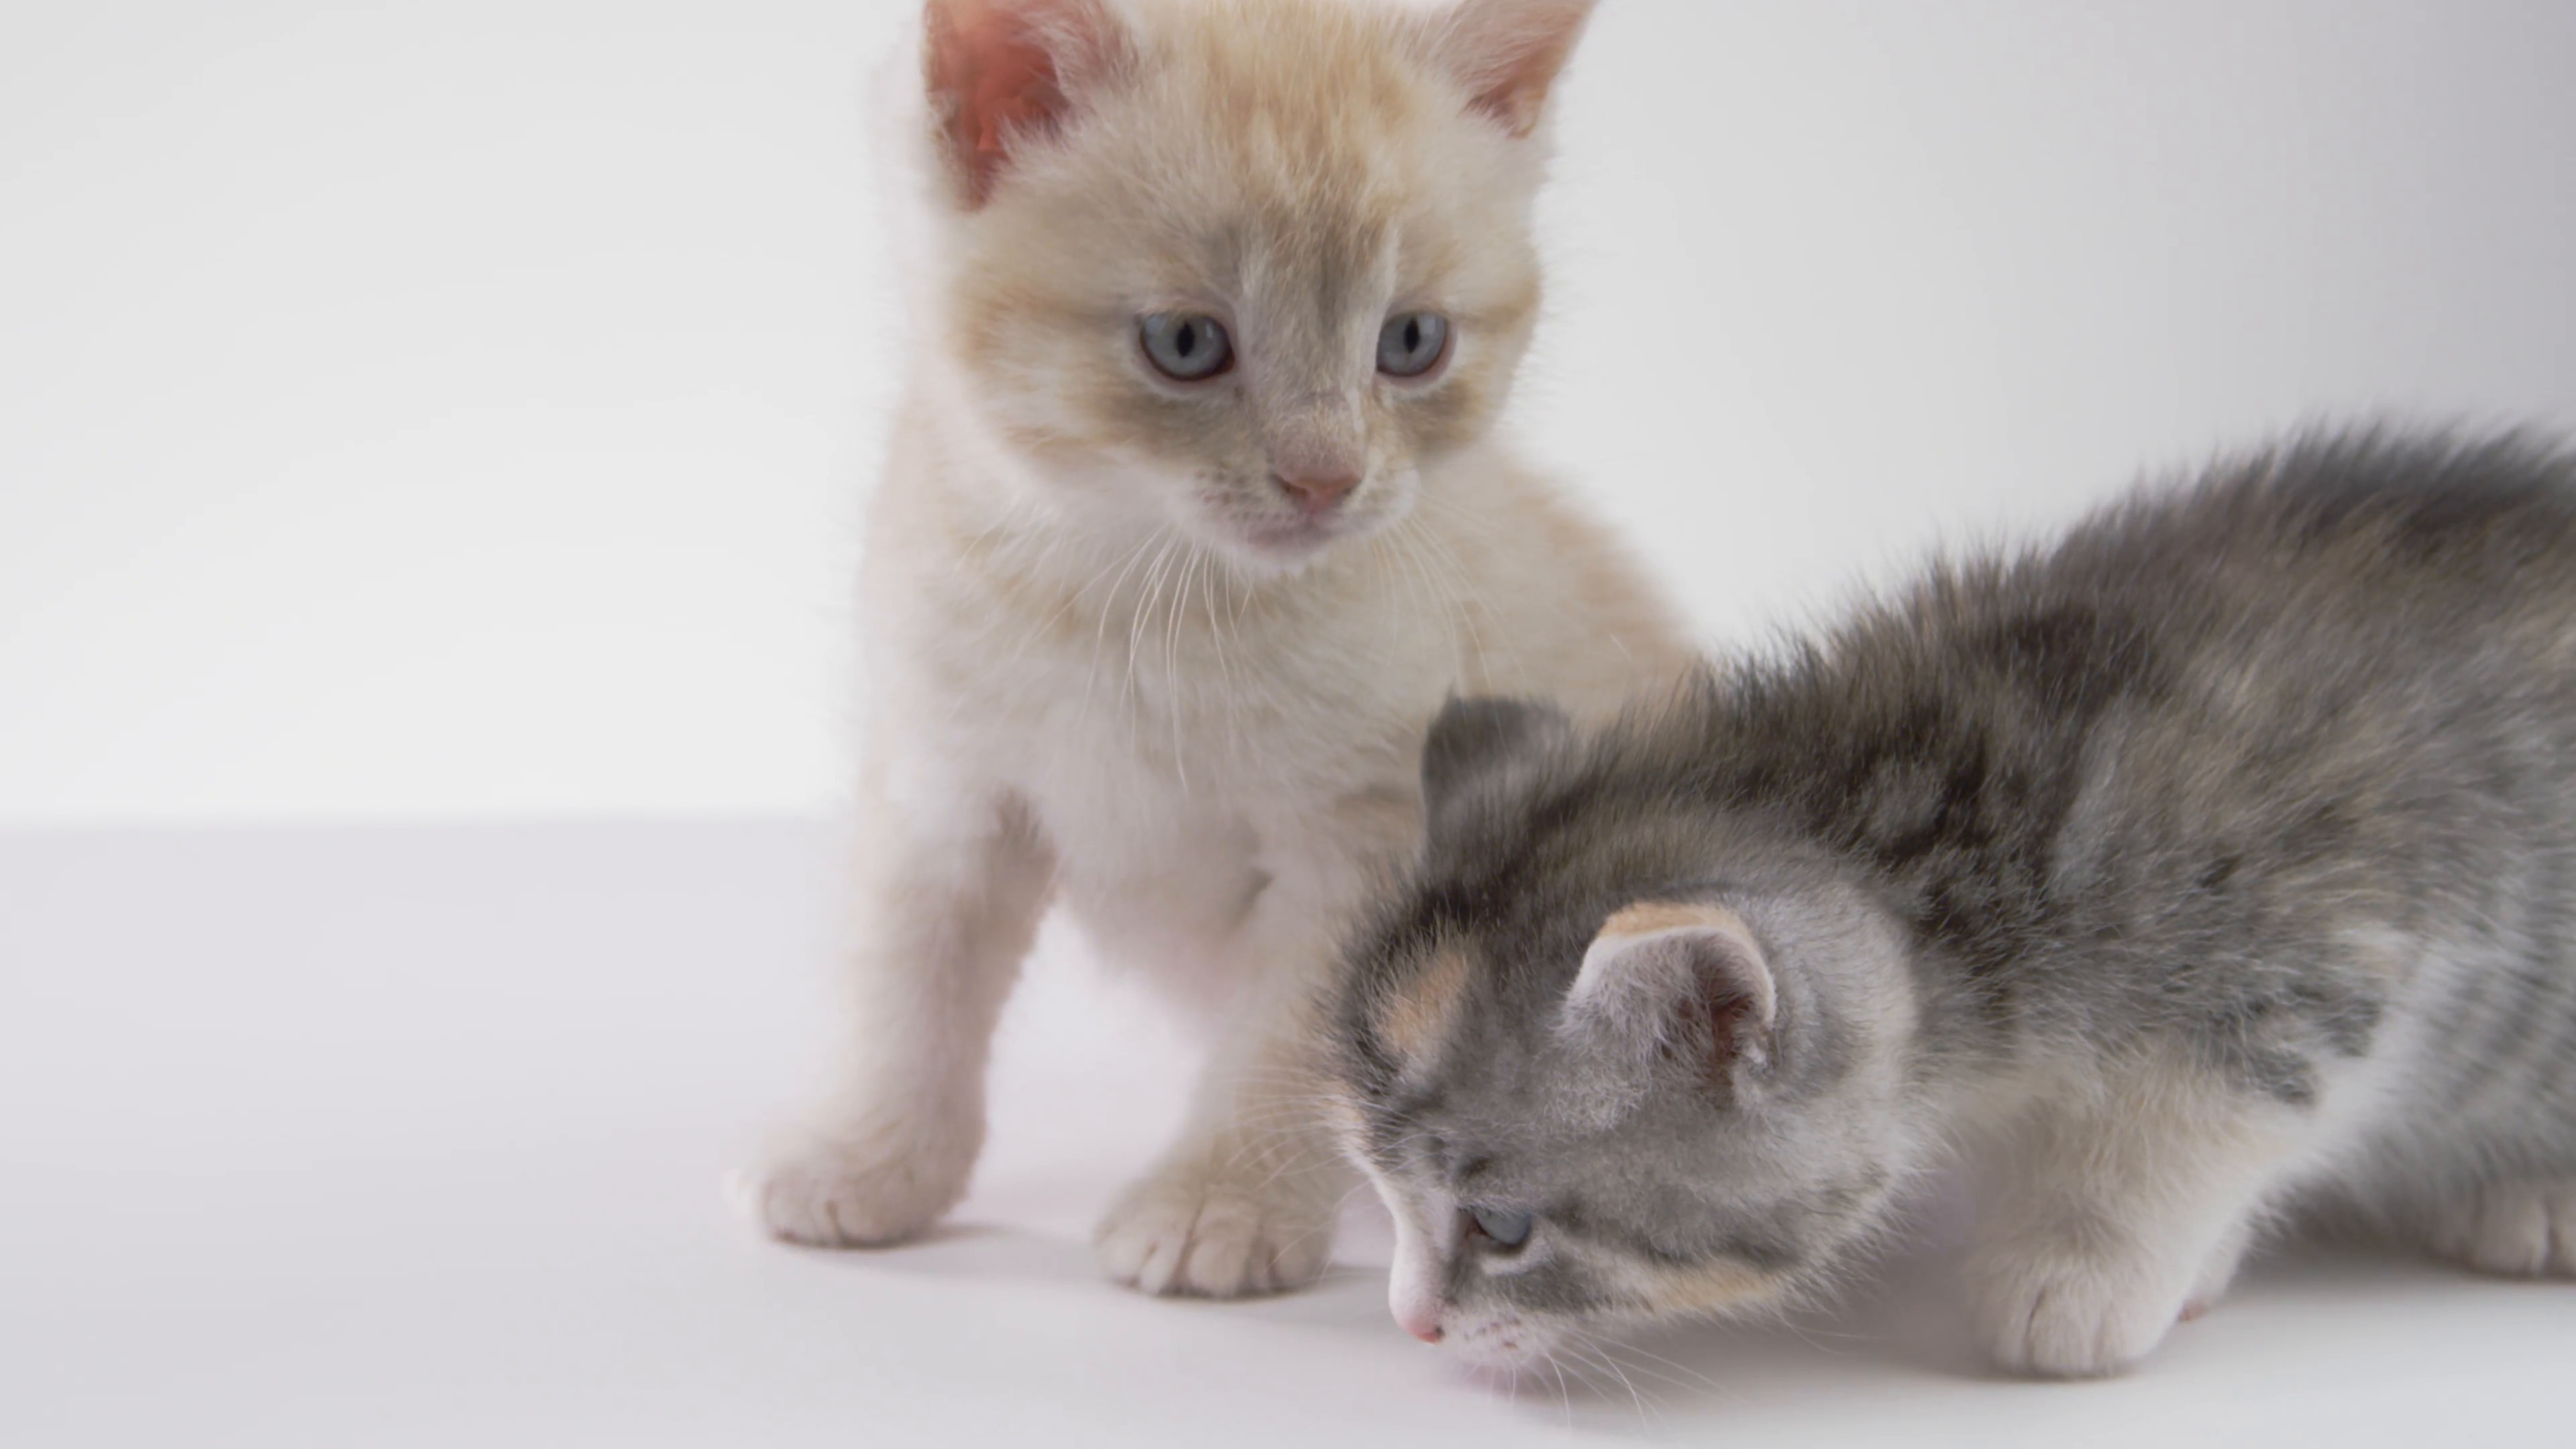 3840x2160 Kitten Brothers on White background Stock Video Footage - Storyblocks Video